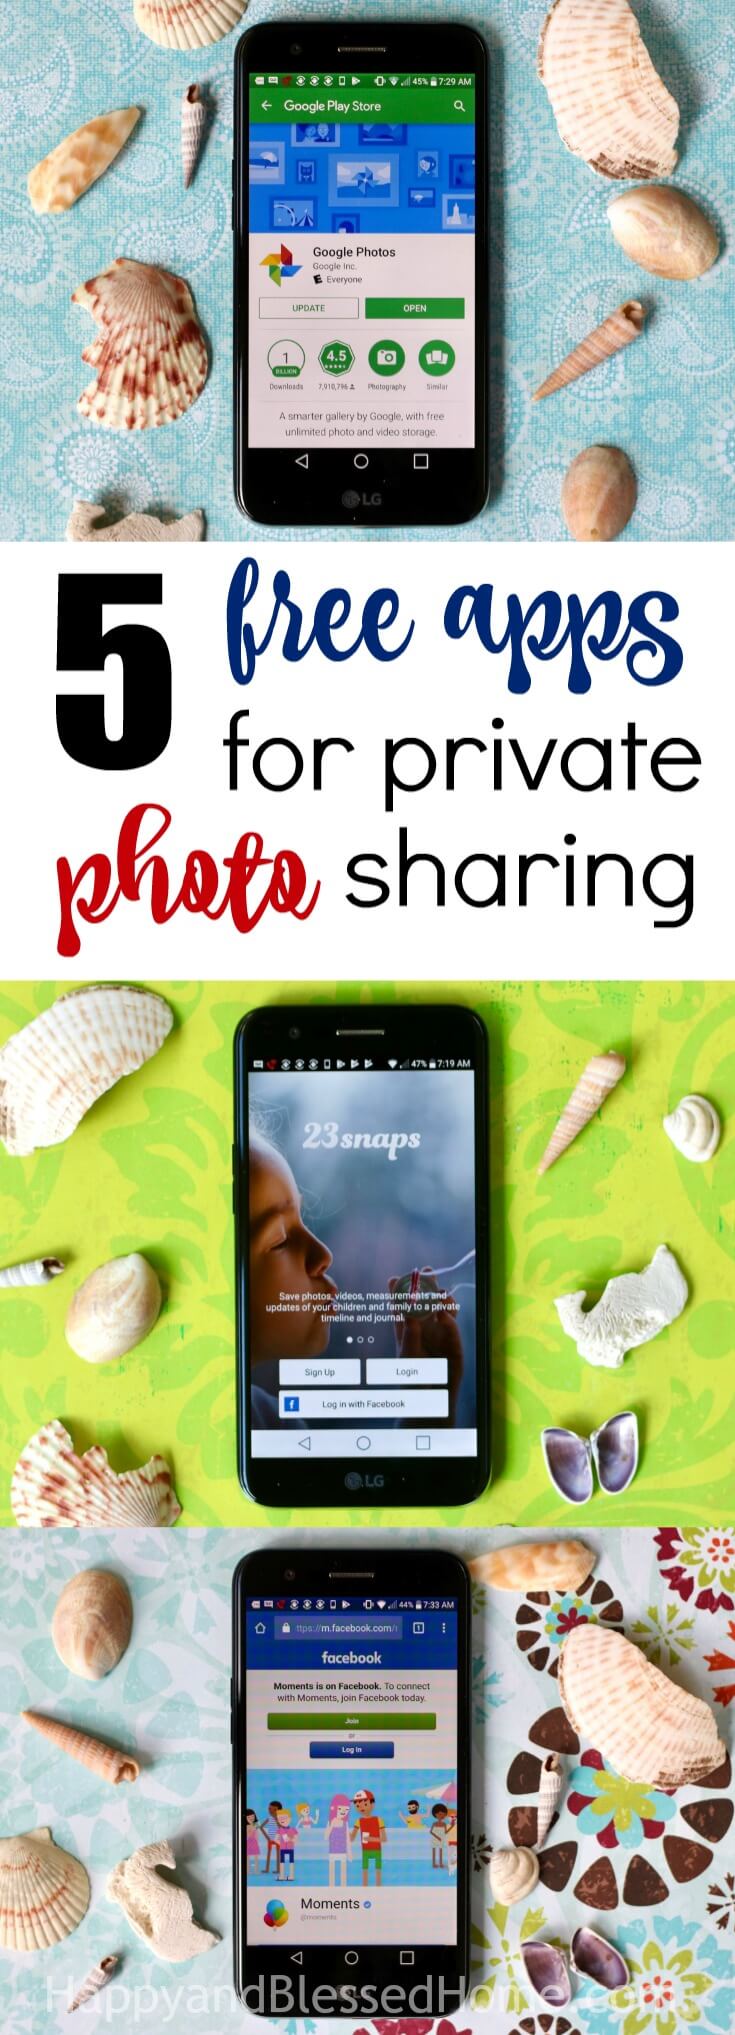 5 FREE Apps for Private Photo Sharing